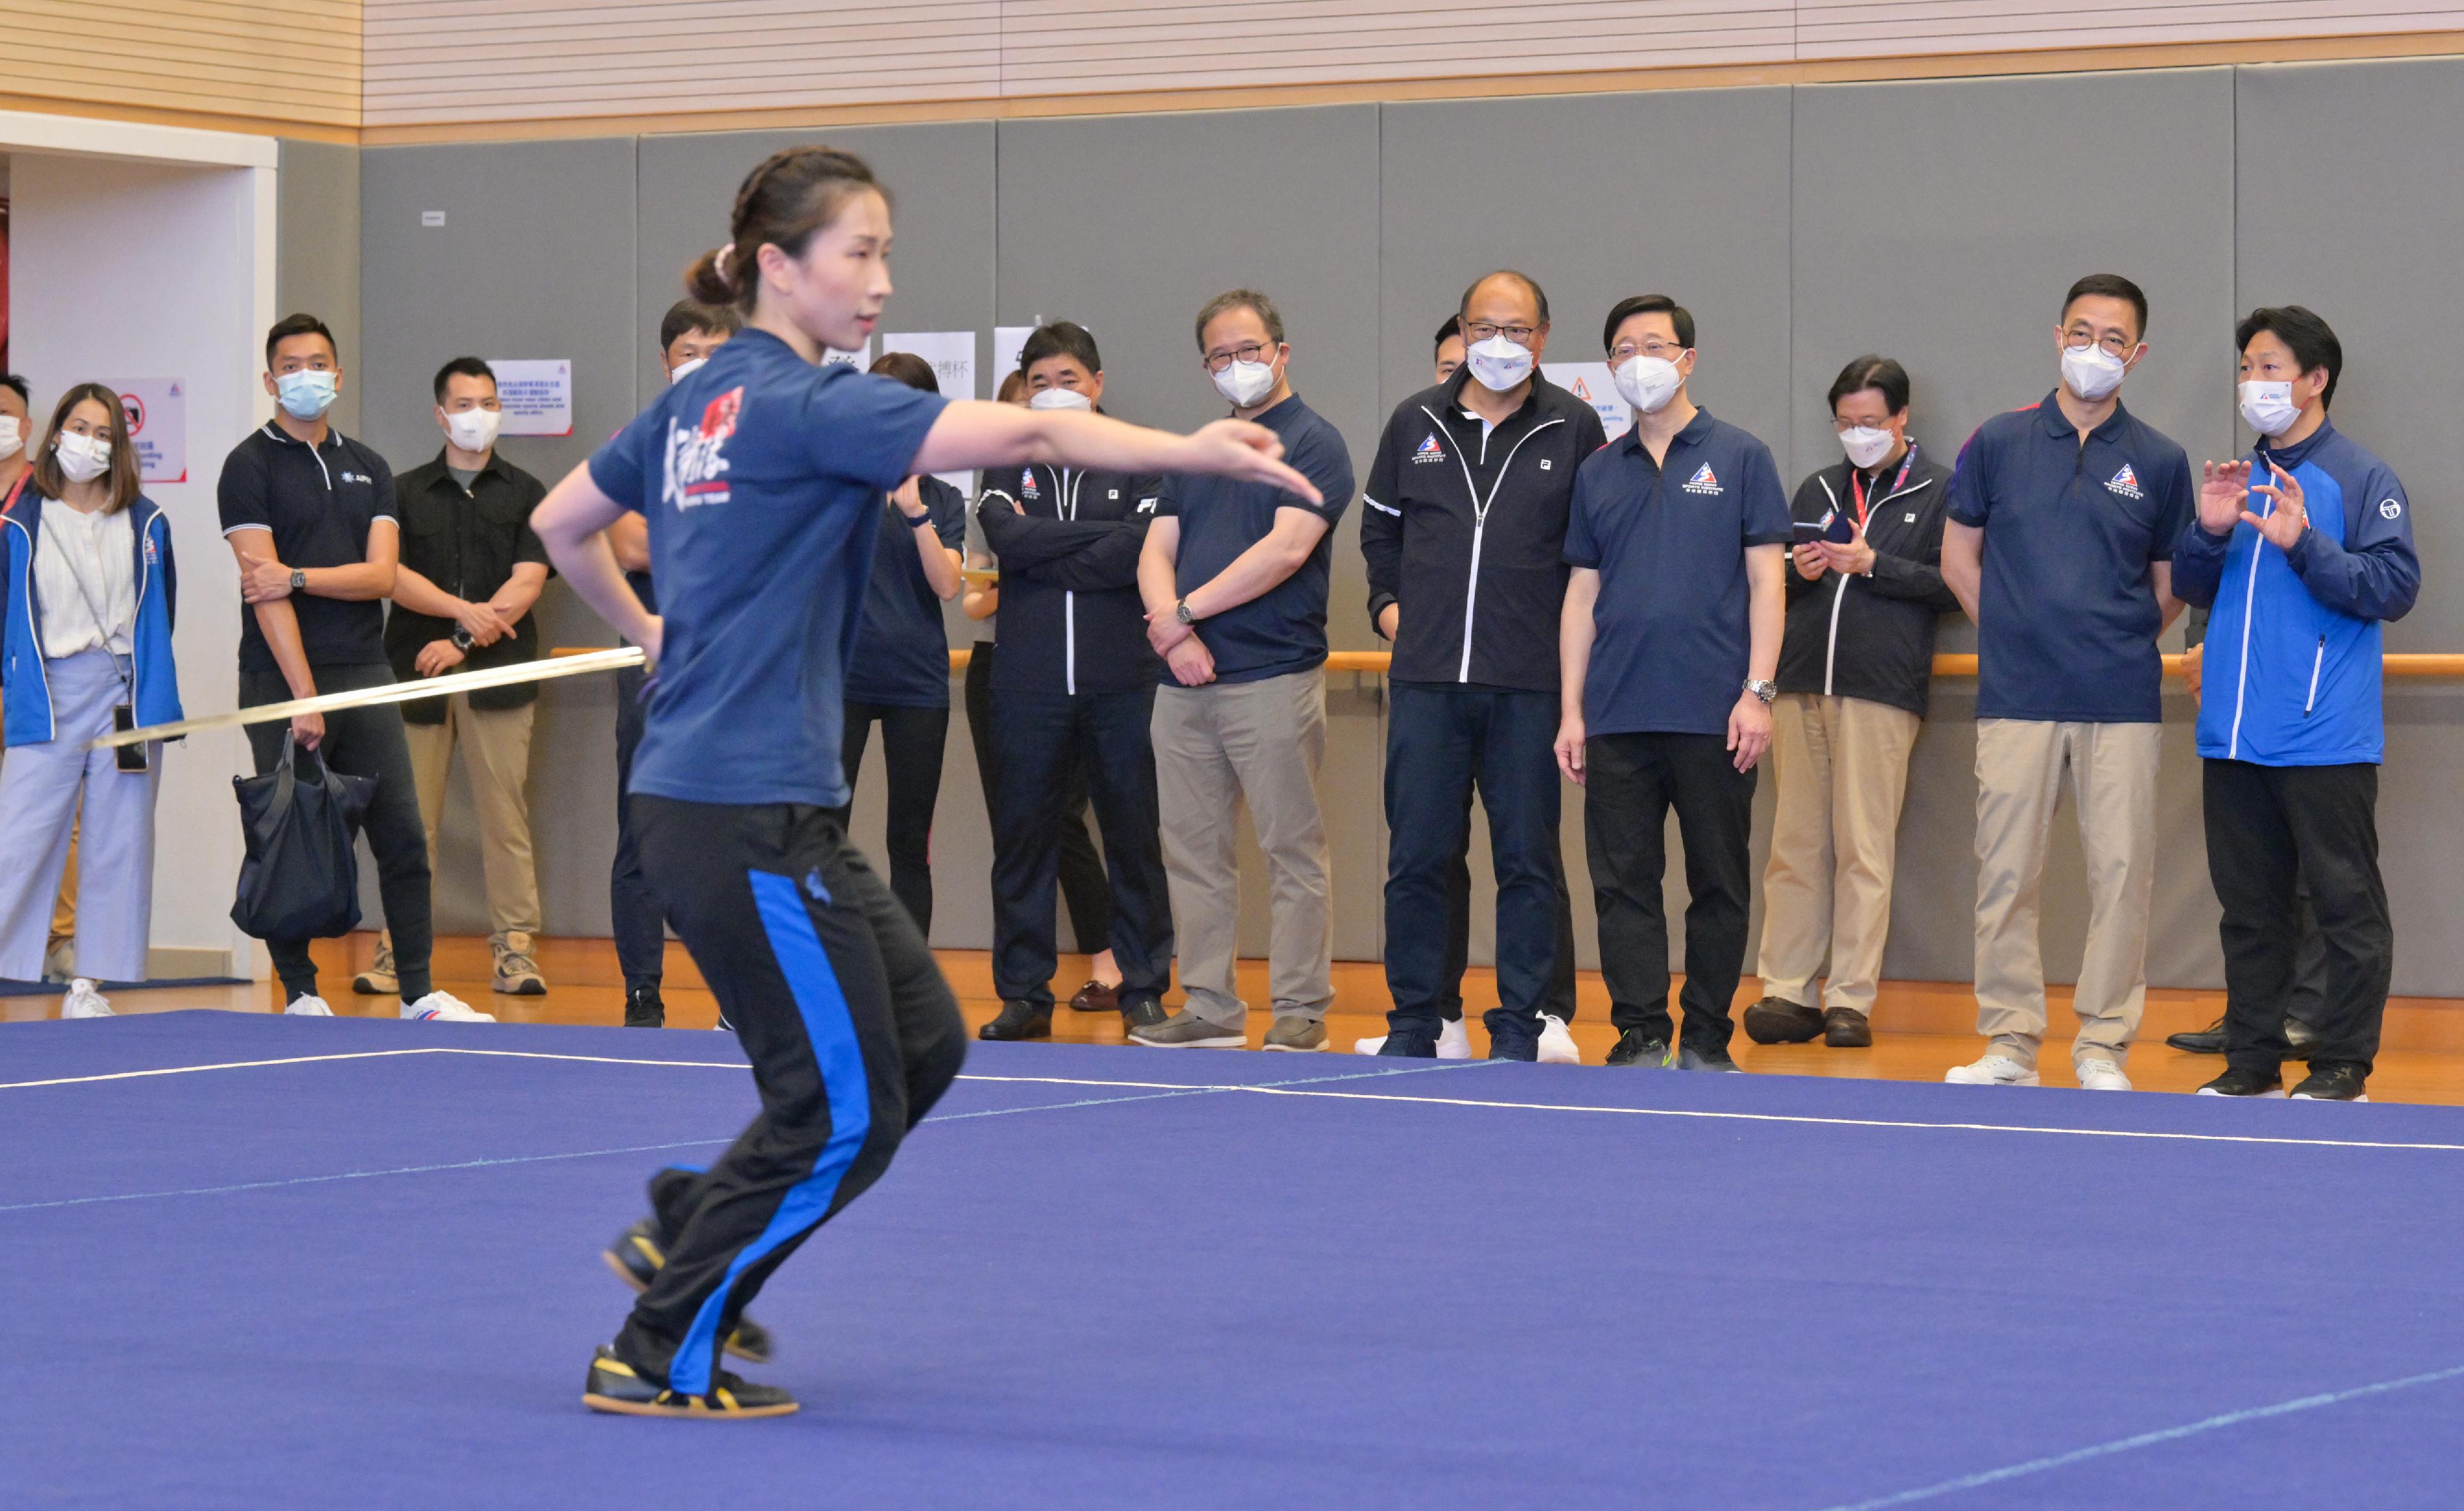 The Chief Executive, Mr John Lee, today (August 16) visited the Hong Kong Sports Institute (HKSI). Photo shows Mr Lee (back row, fourth right), watching a demonstration by a wushu athlete. Looking on are the Secretary for Culture, Sports and Tourism, Mr Kevin Yeung (back row, second right), and the Chairman of the Board of Directors of the HKSI, Dr Lam Tai-fai (back row, fifth right).